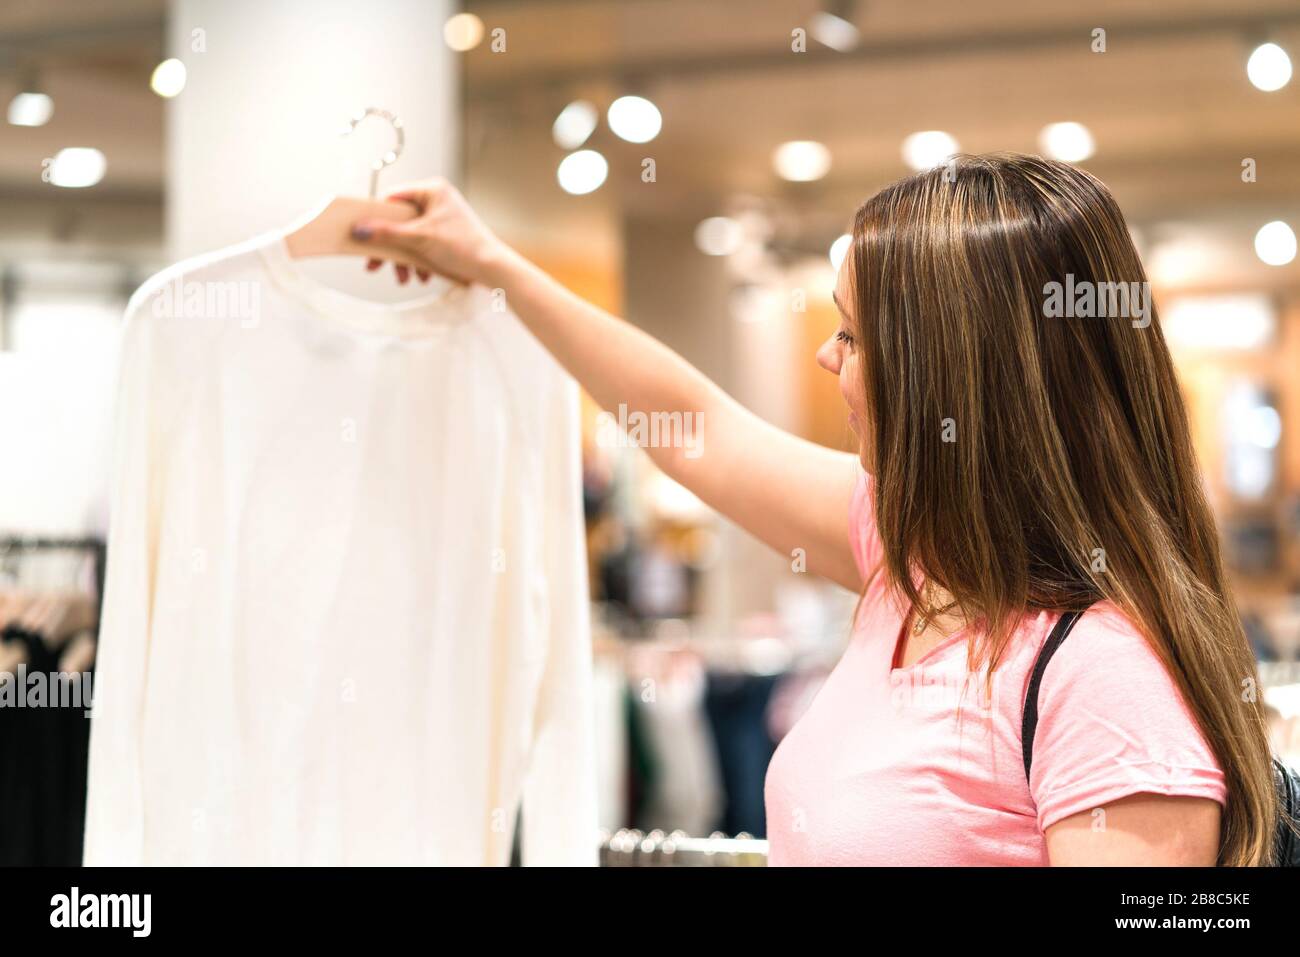 Woman holding blouse in hanger in fashion store. Shopping for sweater or shirt. Happy customer and shopper looking for new clothing. Stock Photo